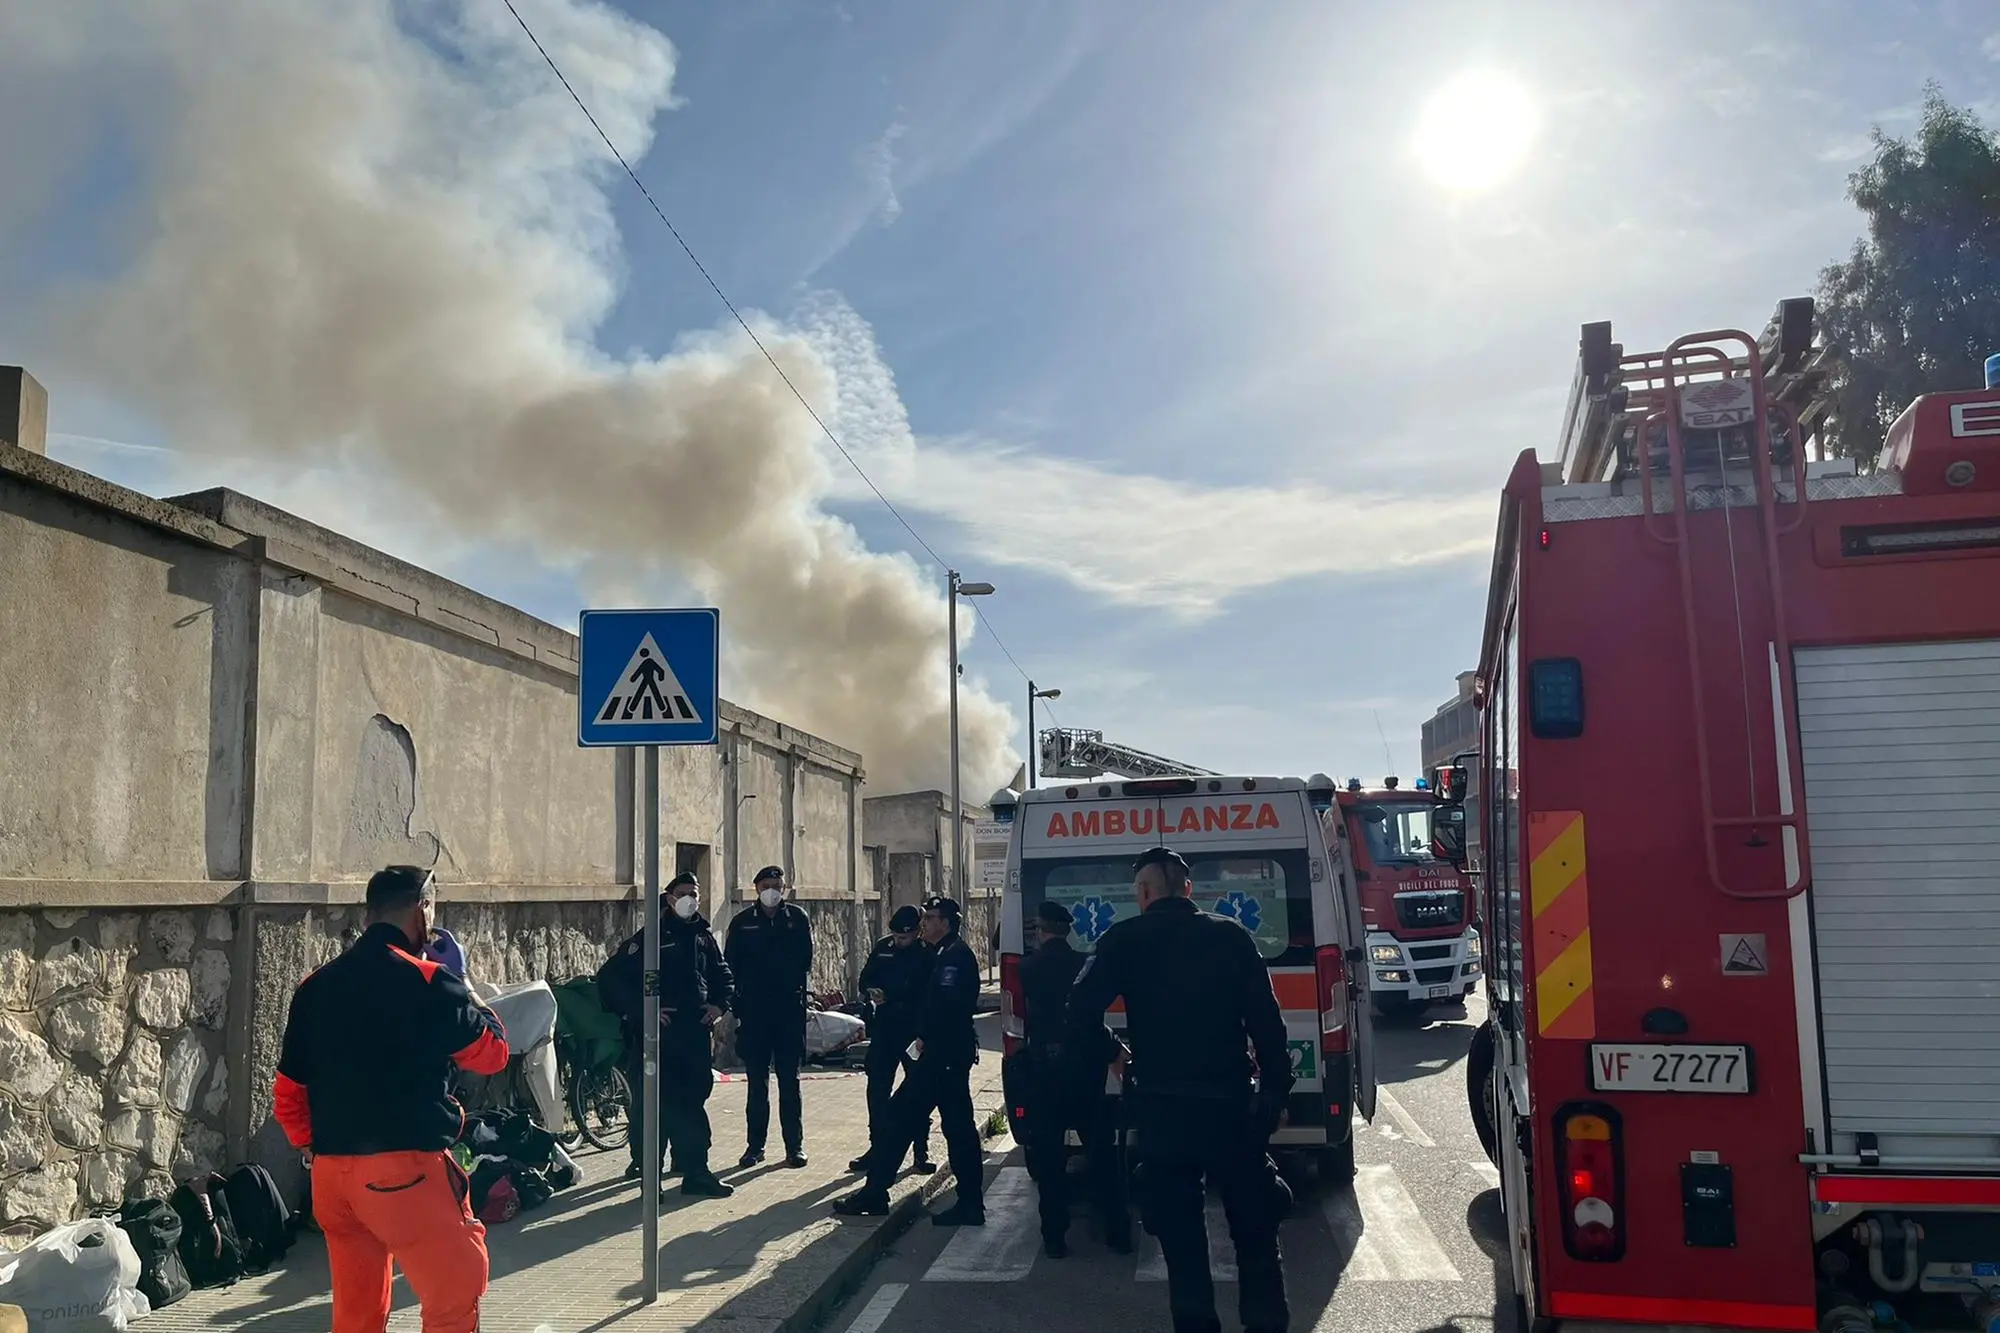 Firefighters on site (Photo Vercelli)